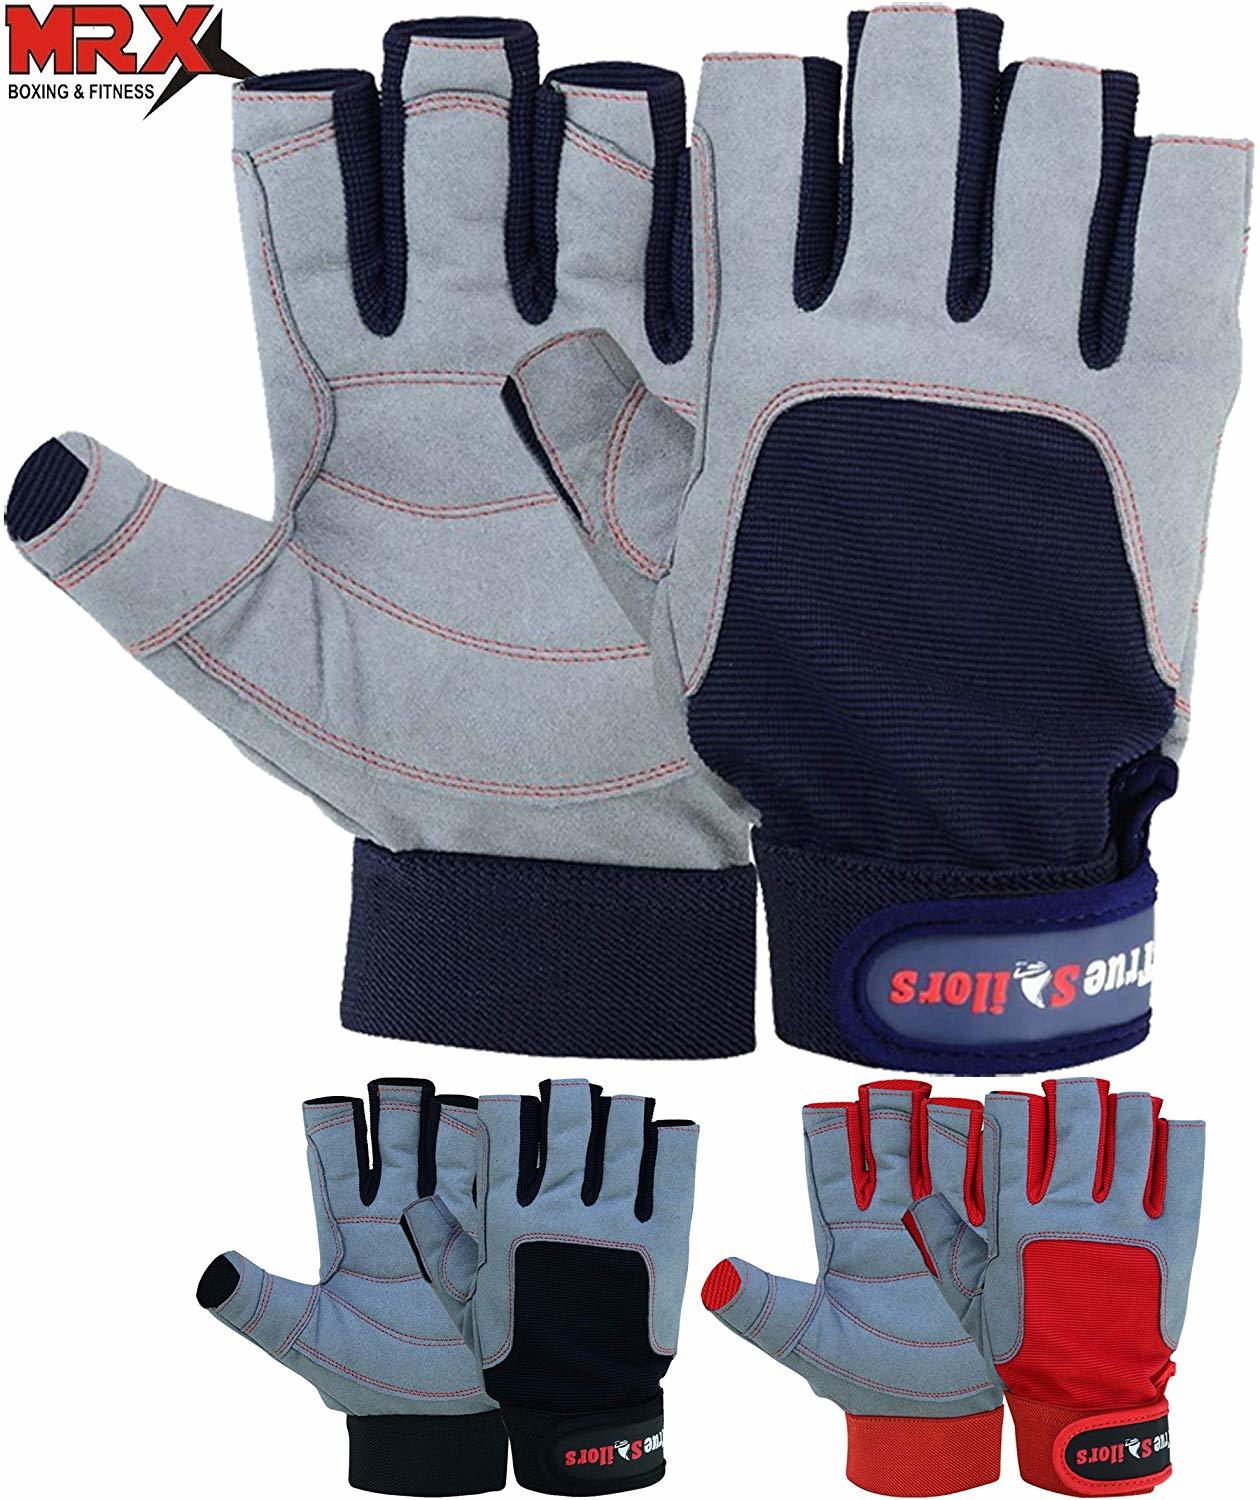 10 Sailing Gloves that will Protect Your Hands While Doing Water Sports 6